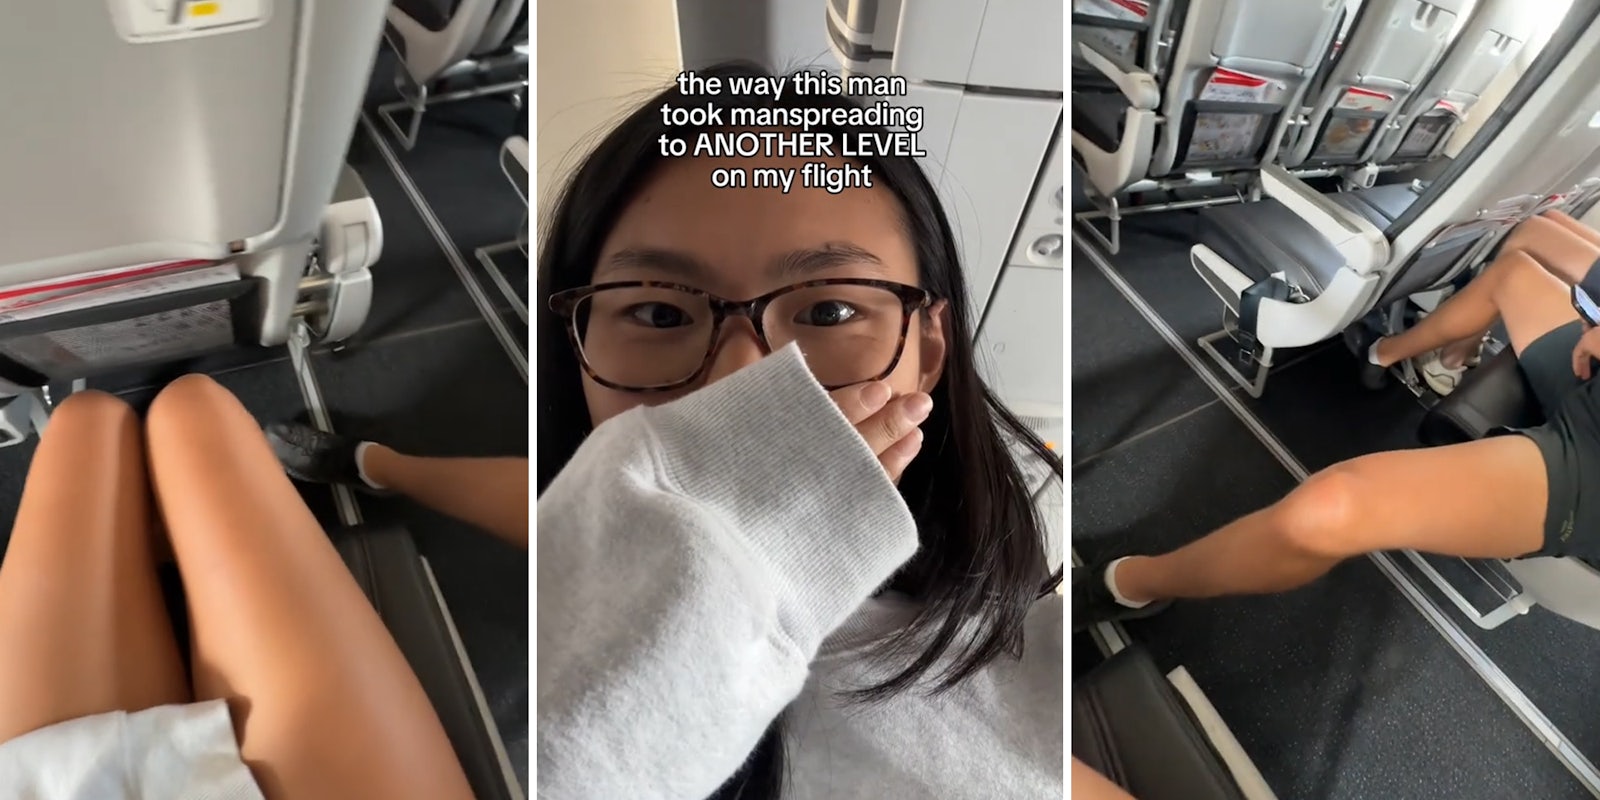 Man on flight takes 'manspreading' to a new level